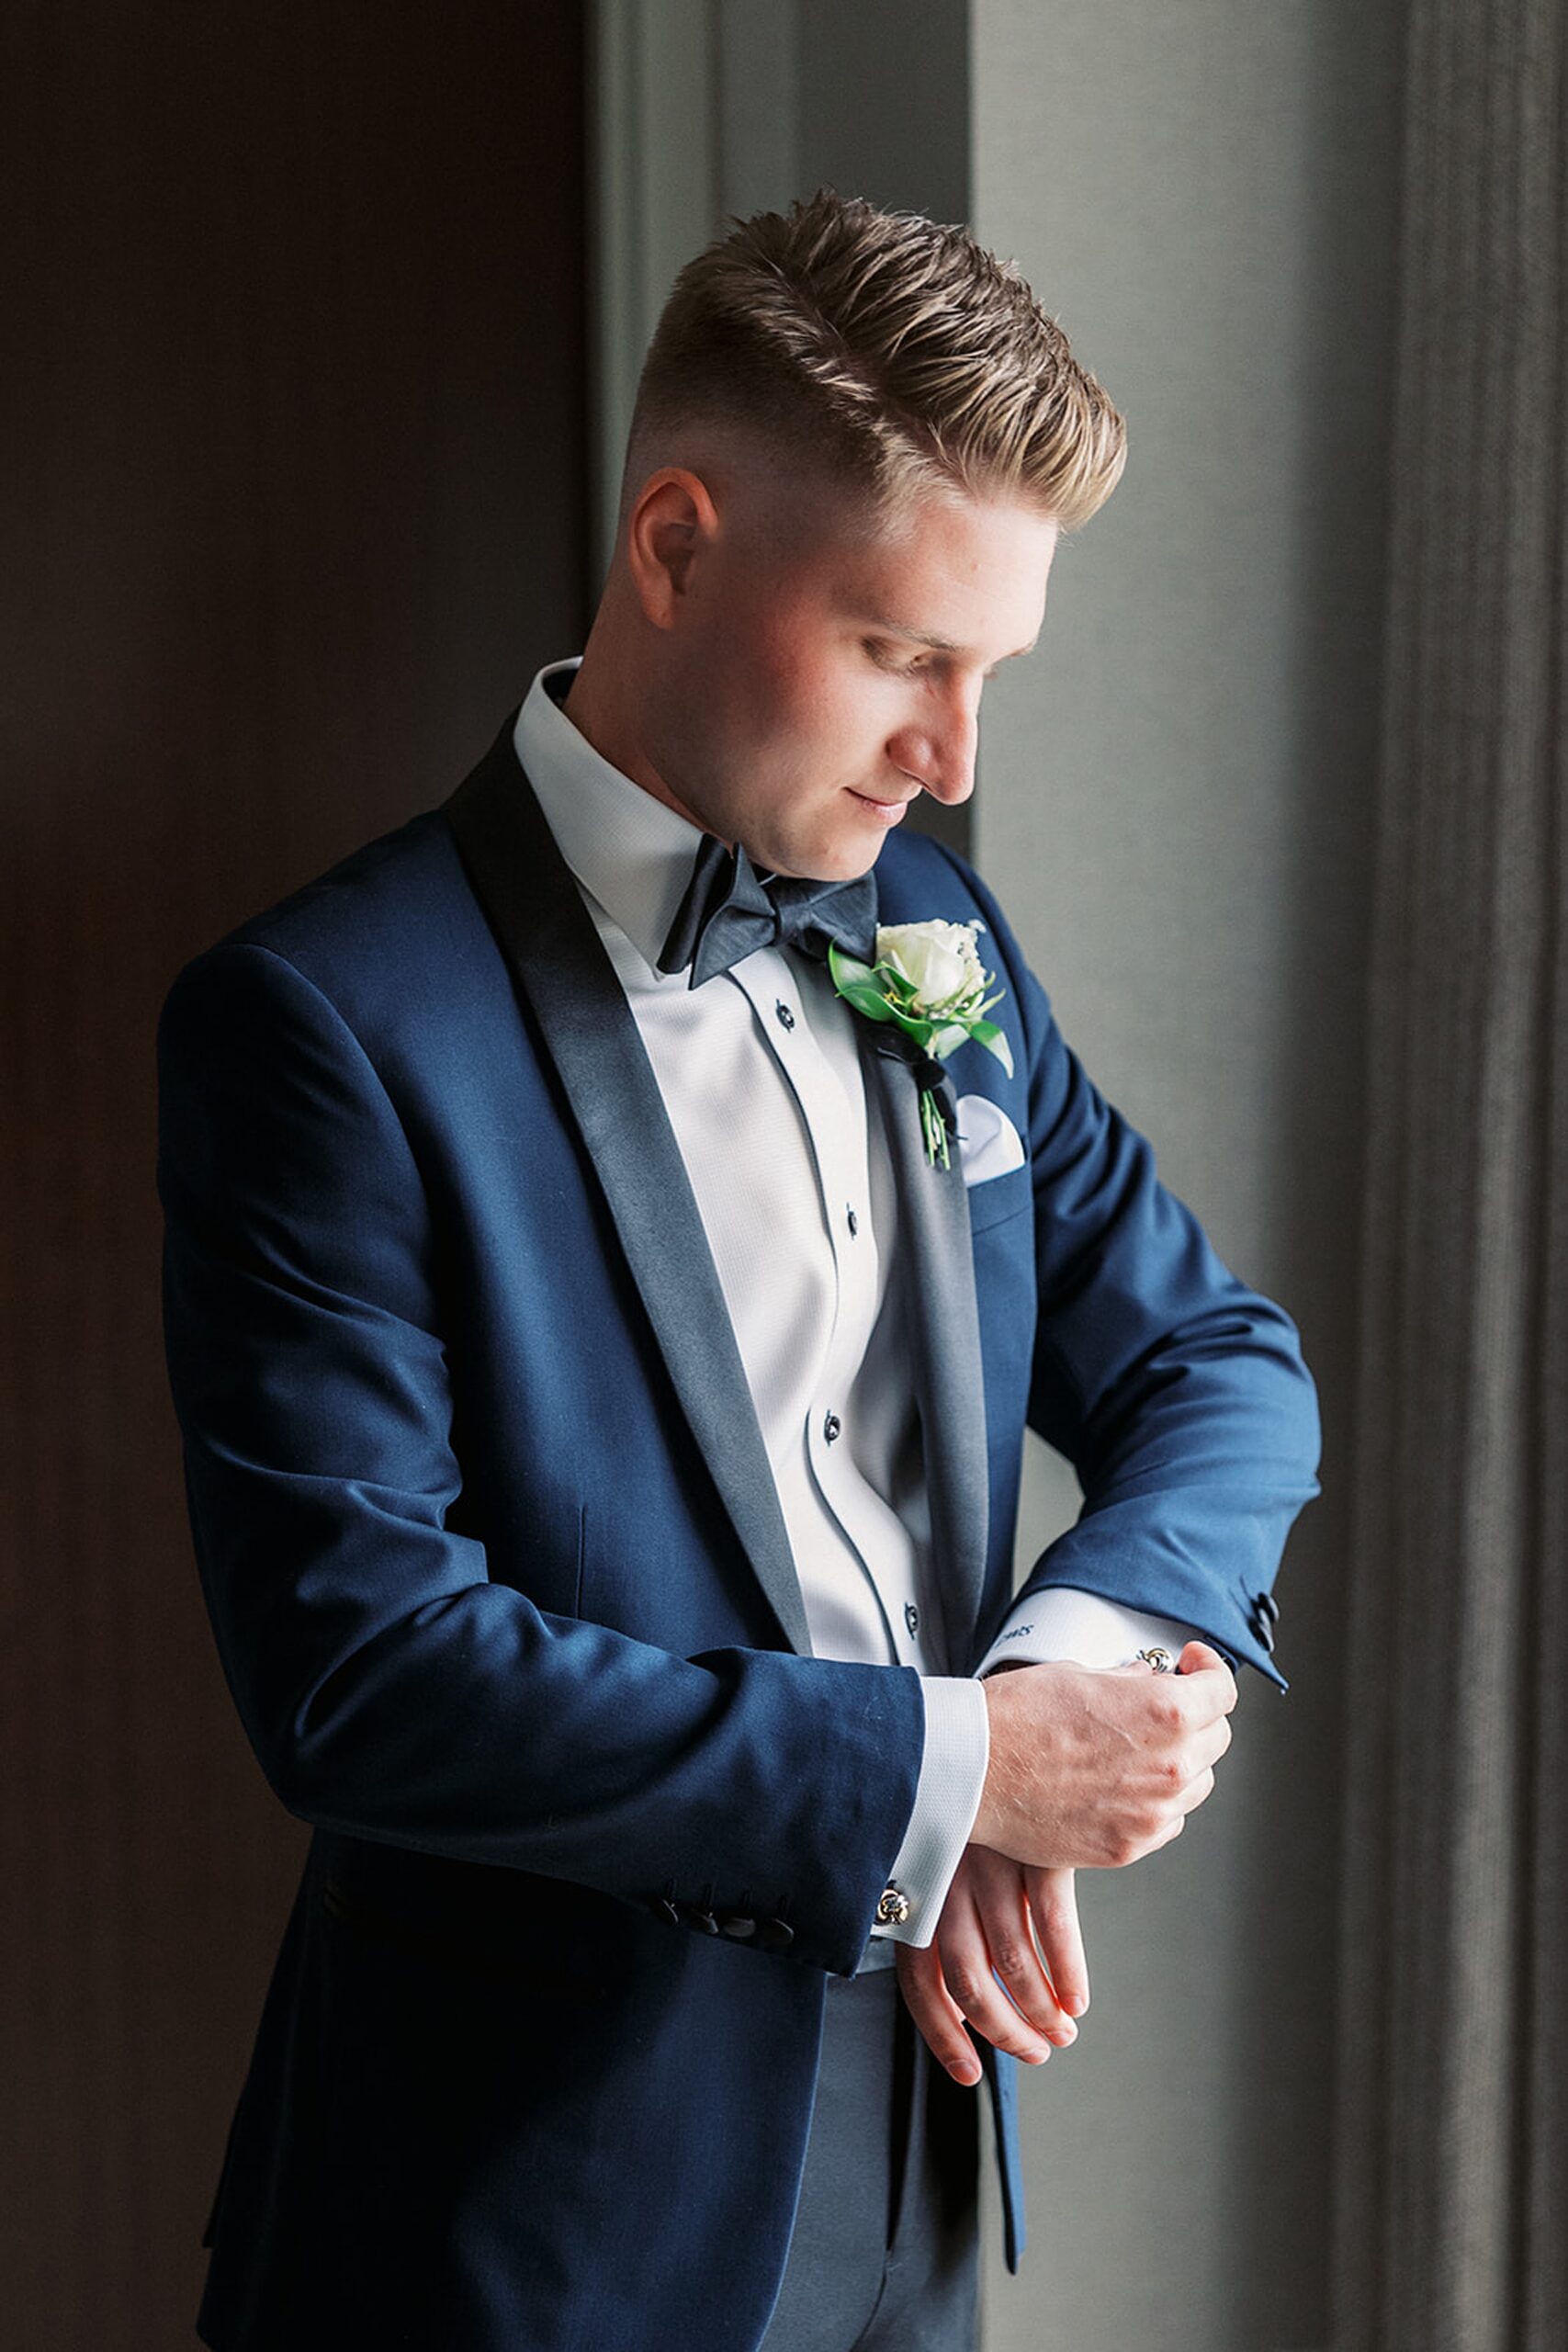 A groom stands in a window adjusting his cufflinks